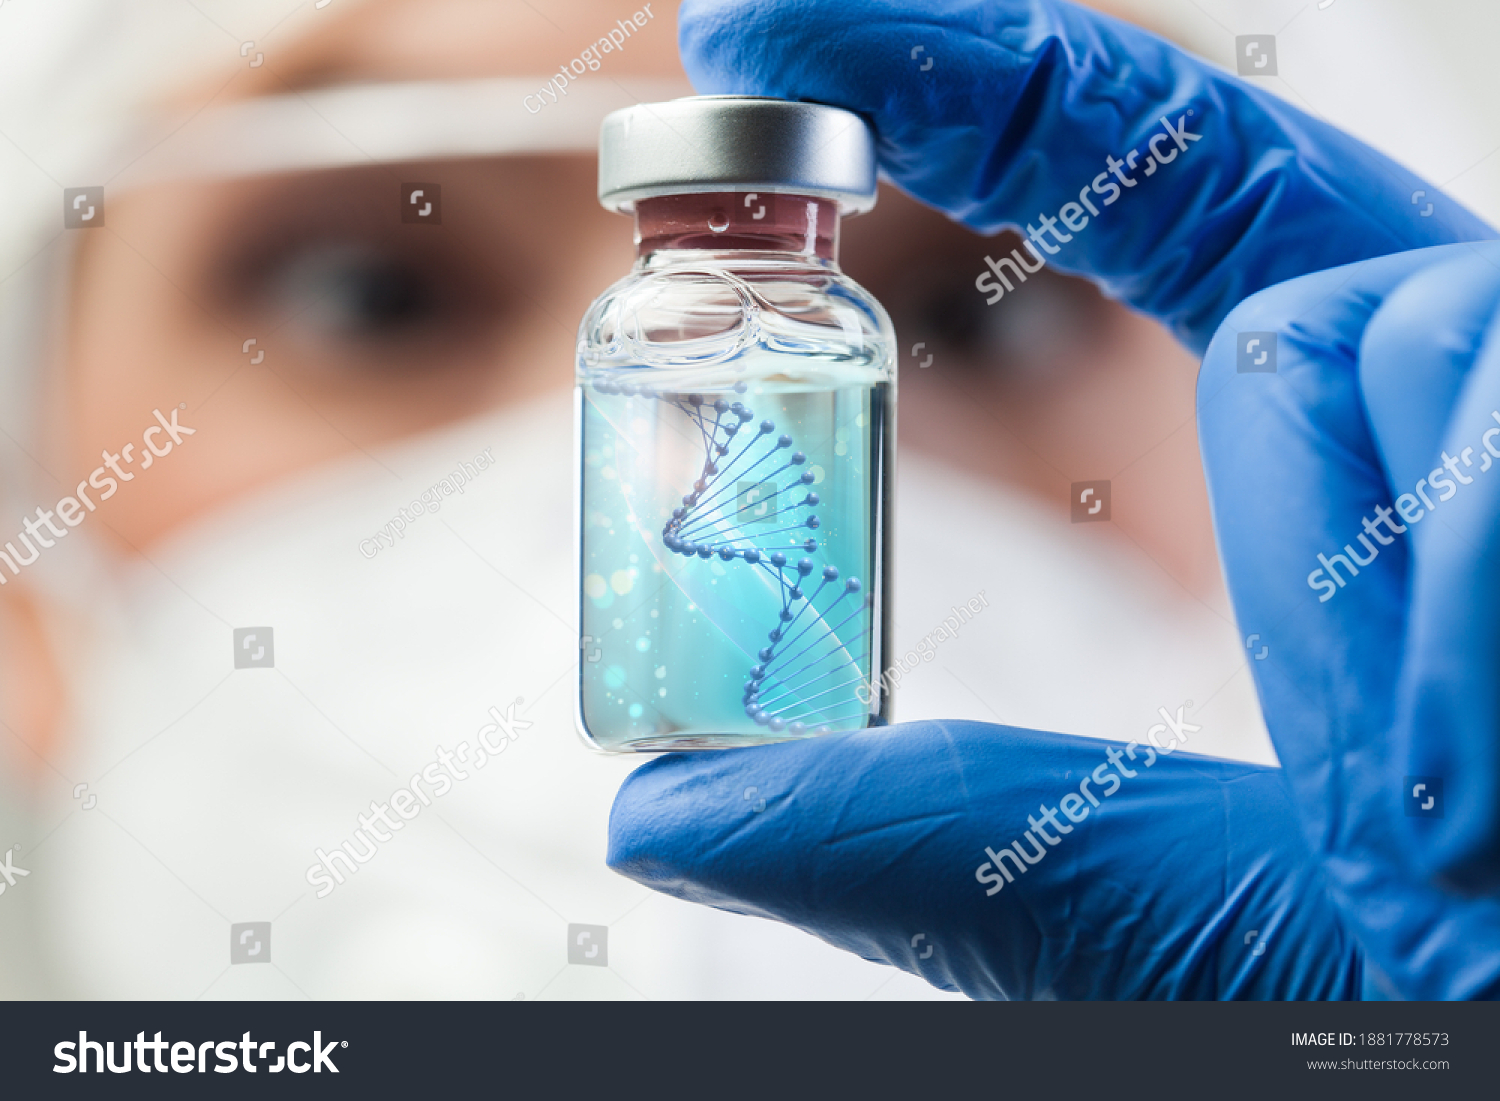 UK lab scientist biotechnologist holding glass ampoule phial with DNA strand,molecule of two polynucleotide chains forming double helix carrying Coronavirus genetic instruction,new strain RNA mutation #1881778573